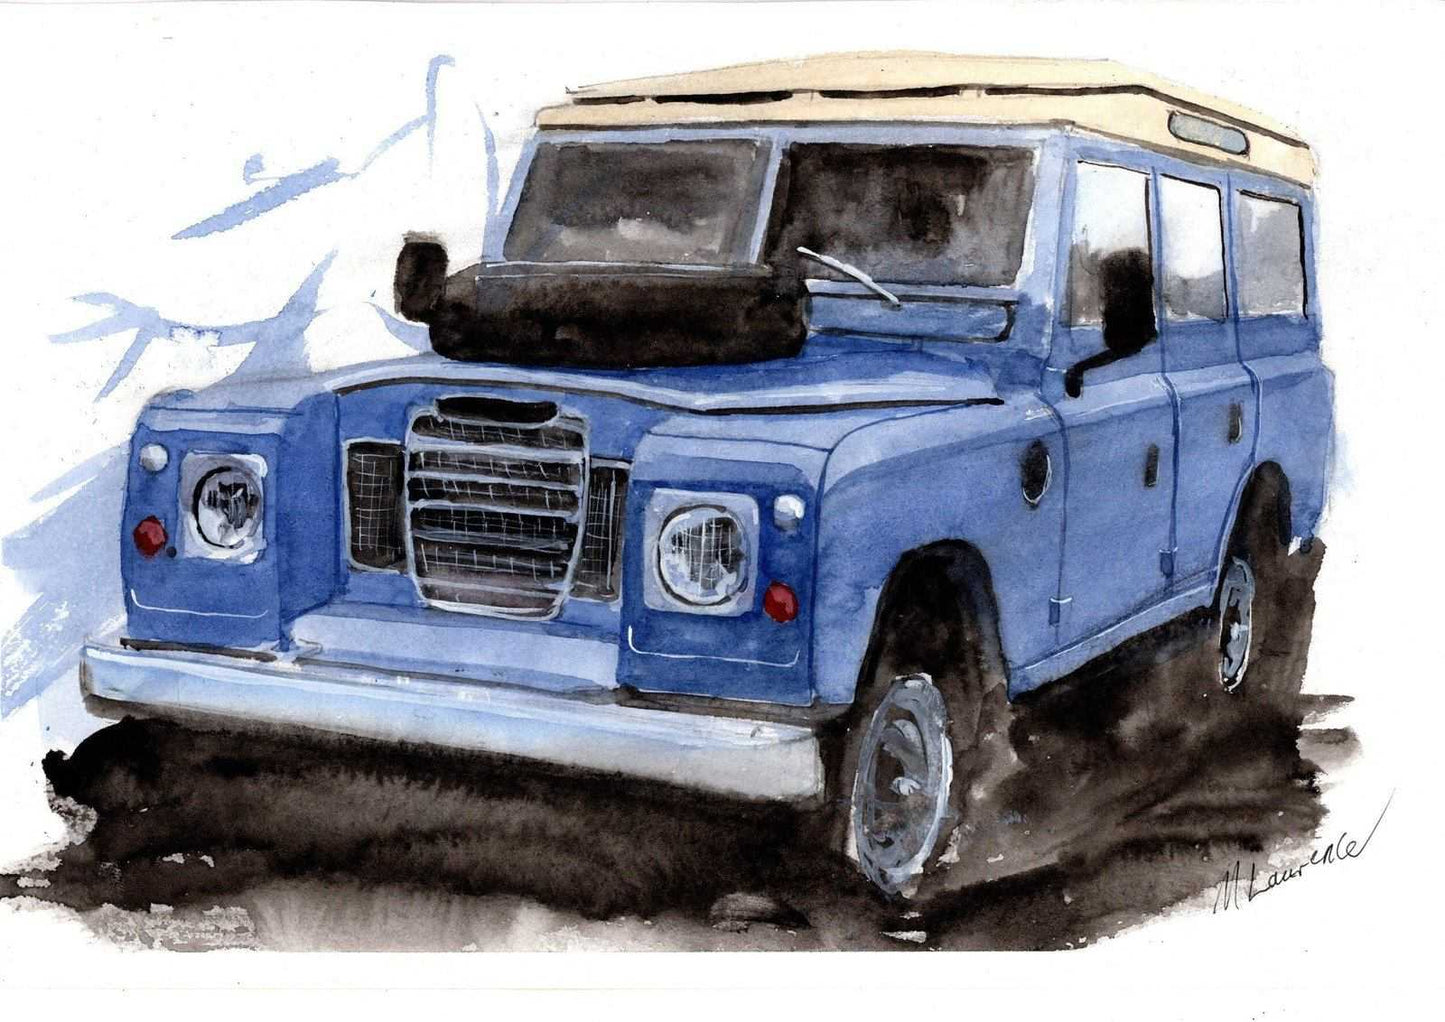 Landrover Series 3 Print Watercolour Painting Limited Print ArtbyMyleslaurence